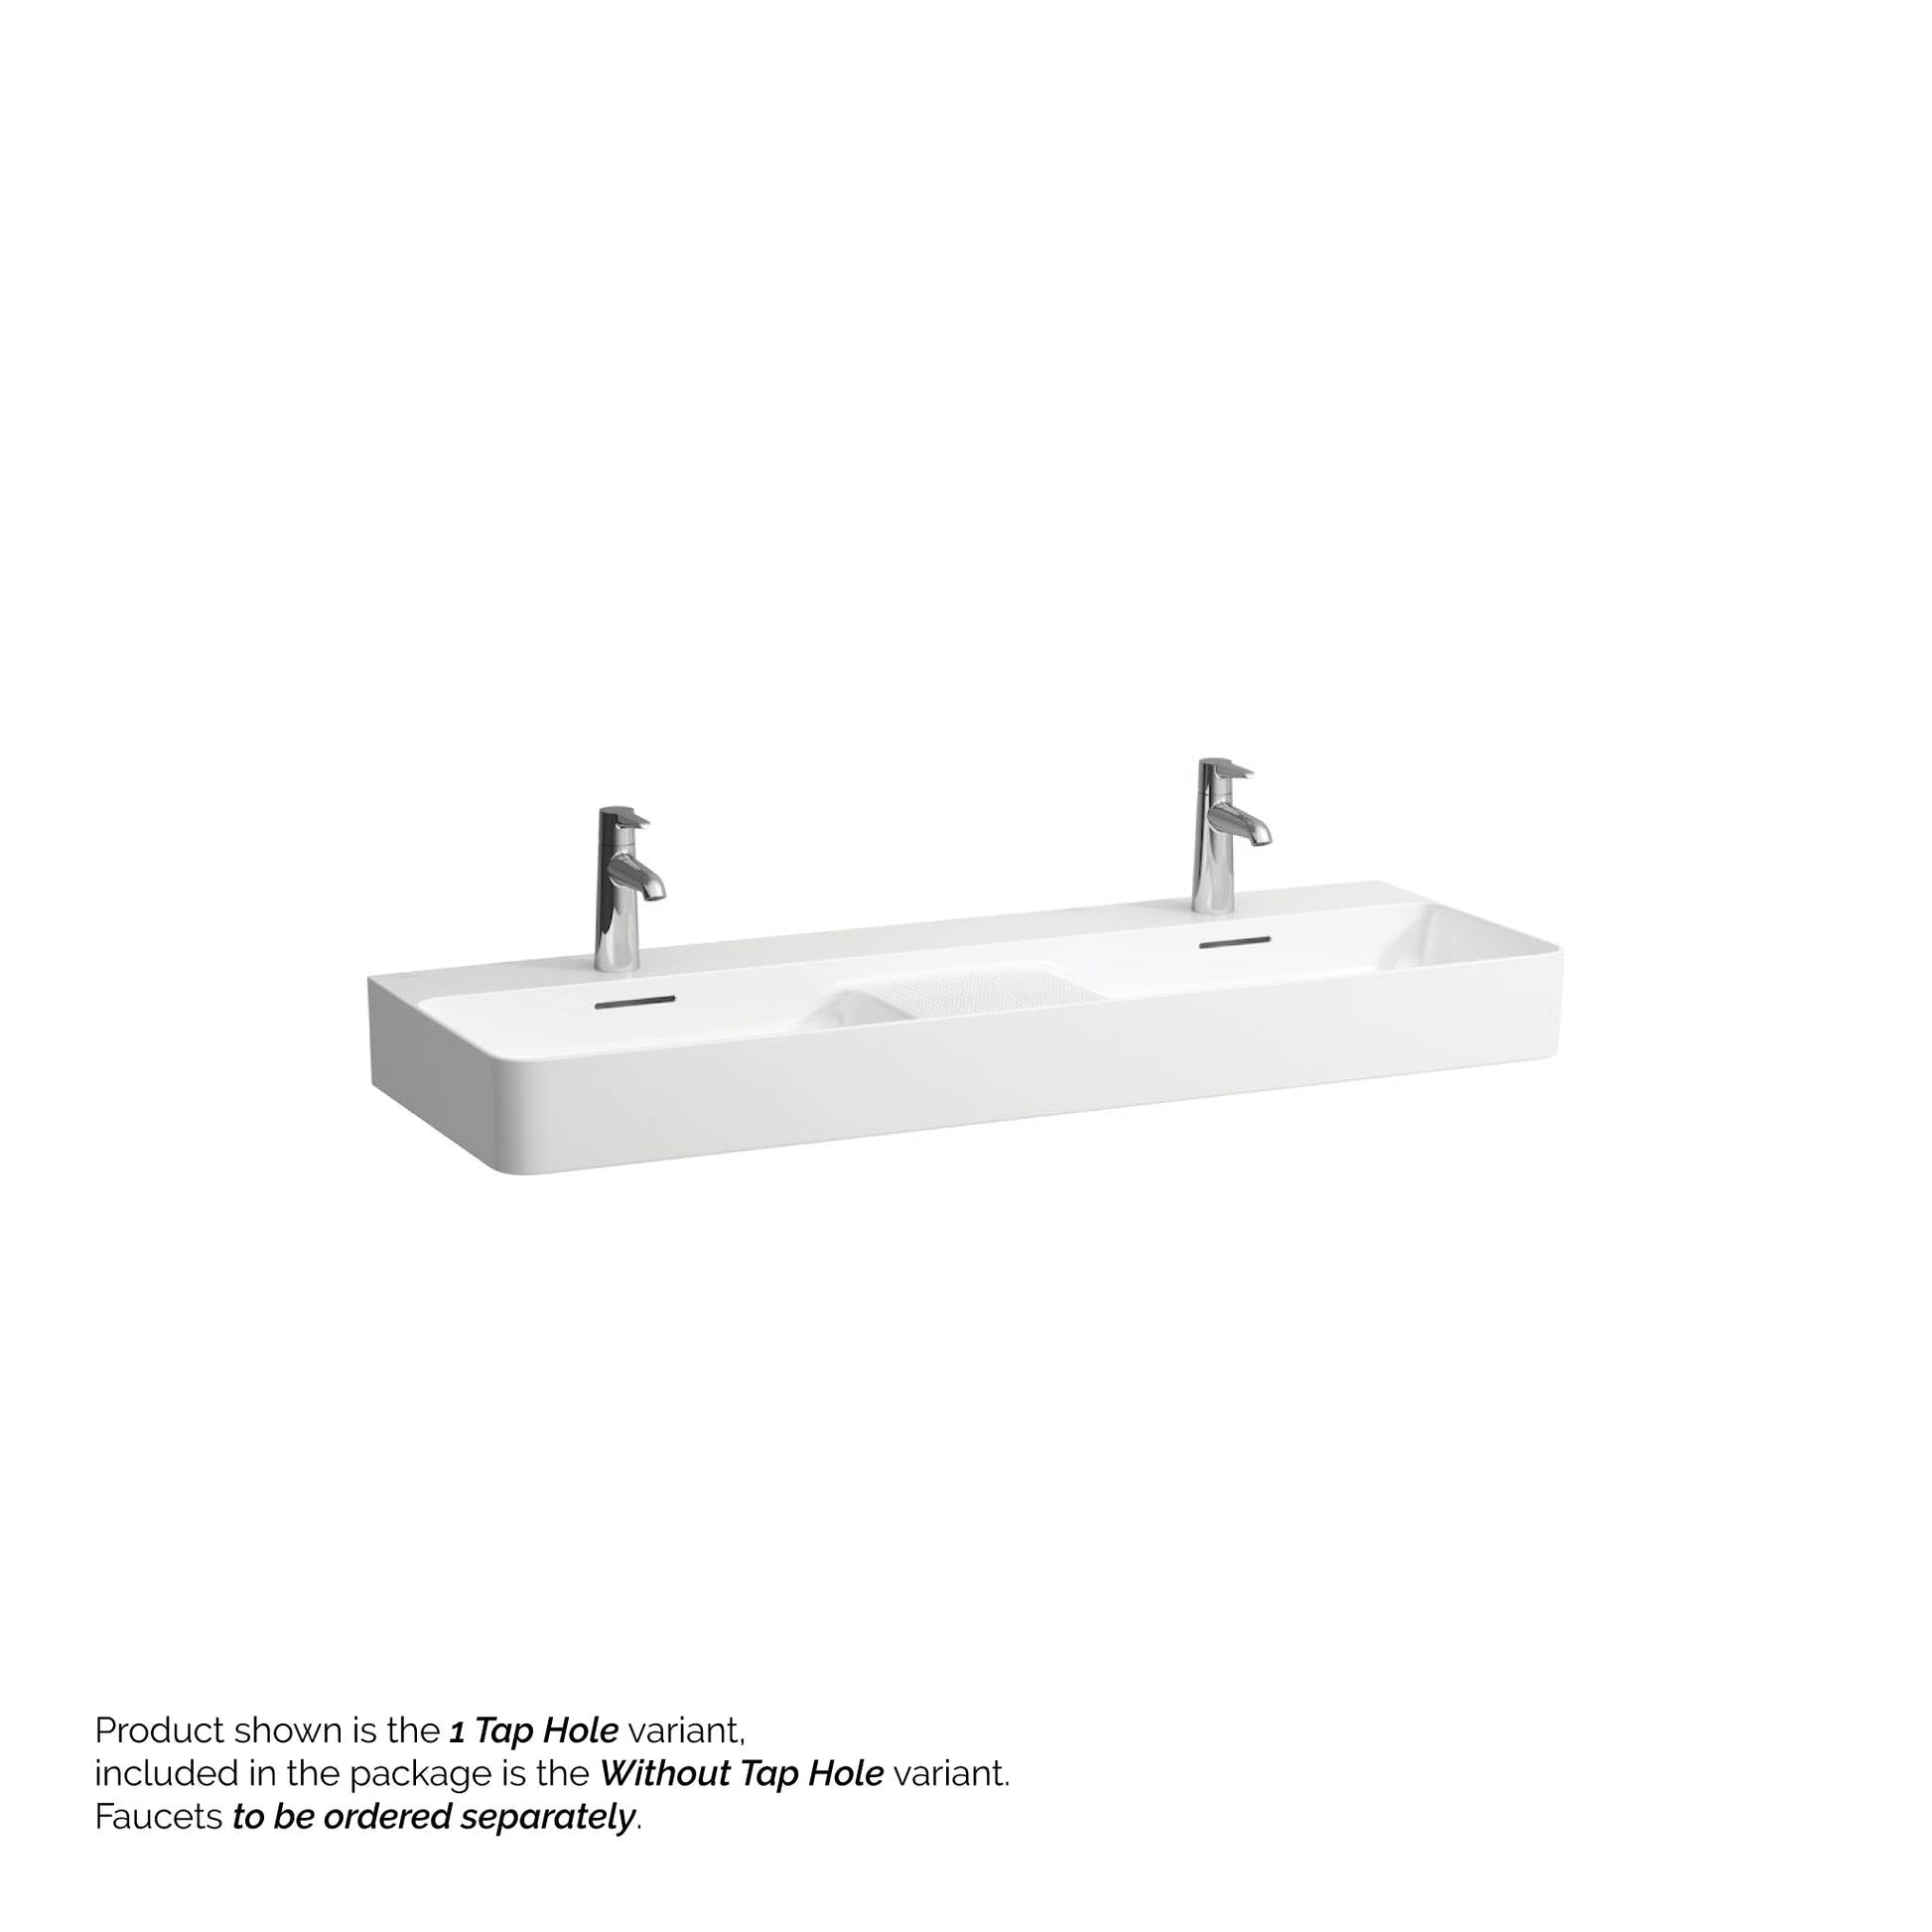 Laufen Val 47" x 17" Matte White Ceramic Wall-Mounted Double Bathroom Sink Without Faucet Hole